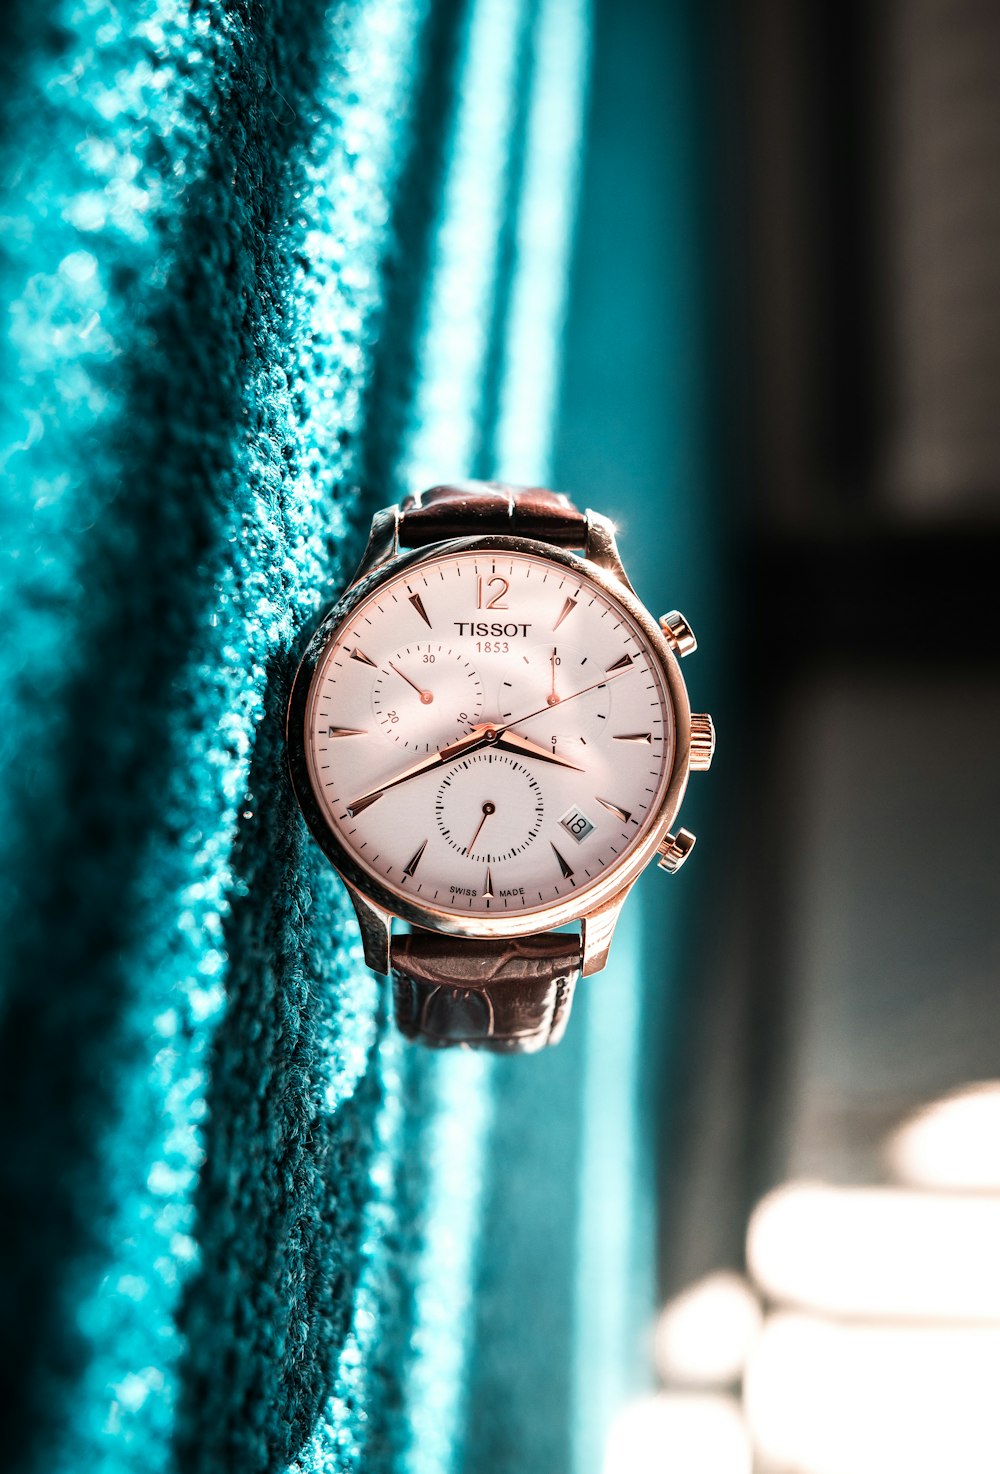 750+ Wrist Watch Pictures | Download Free Images on Unsplash